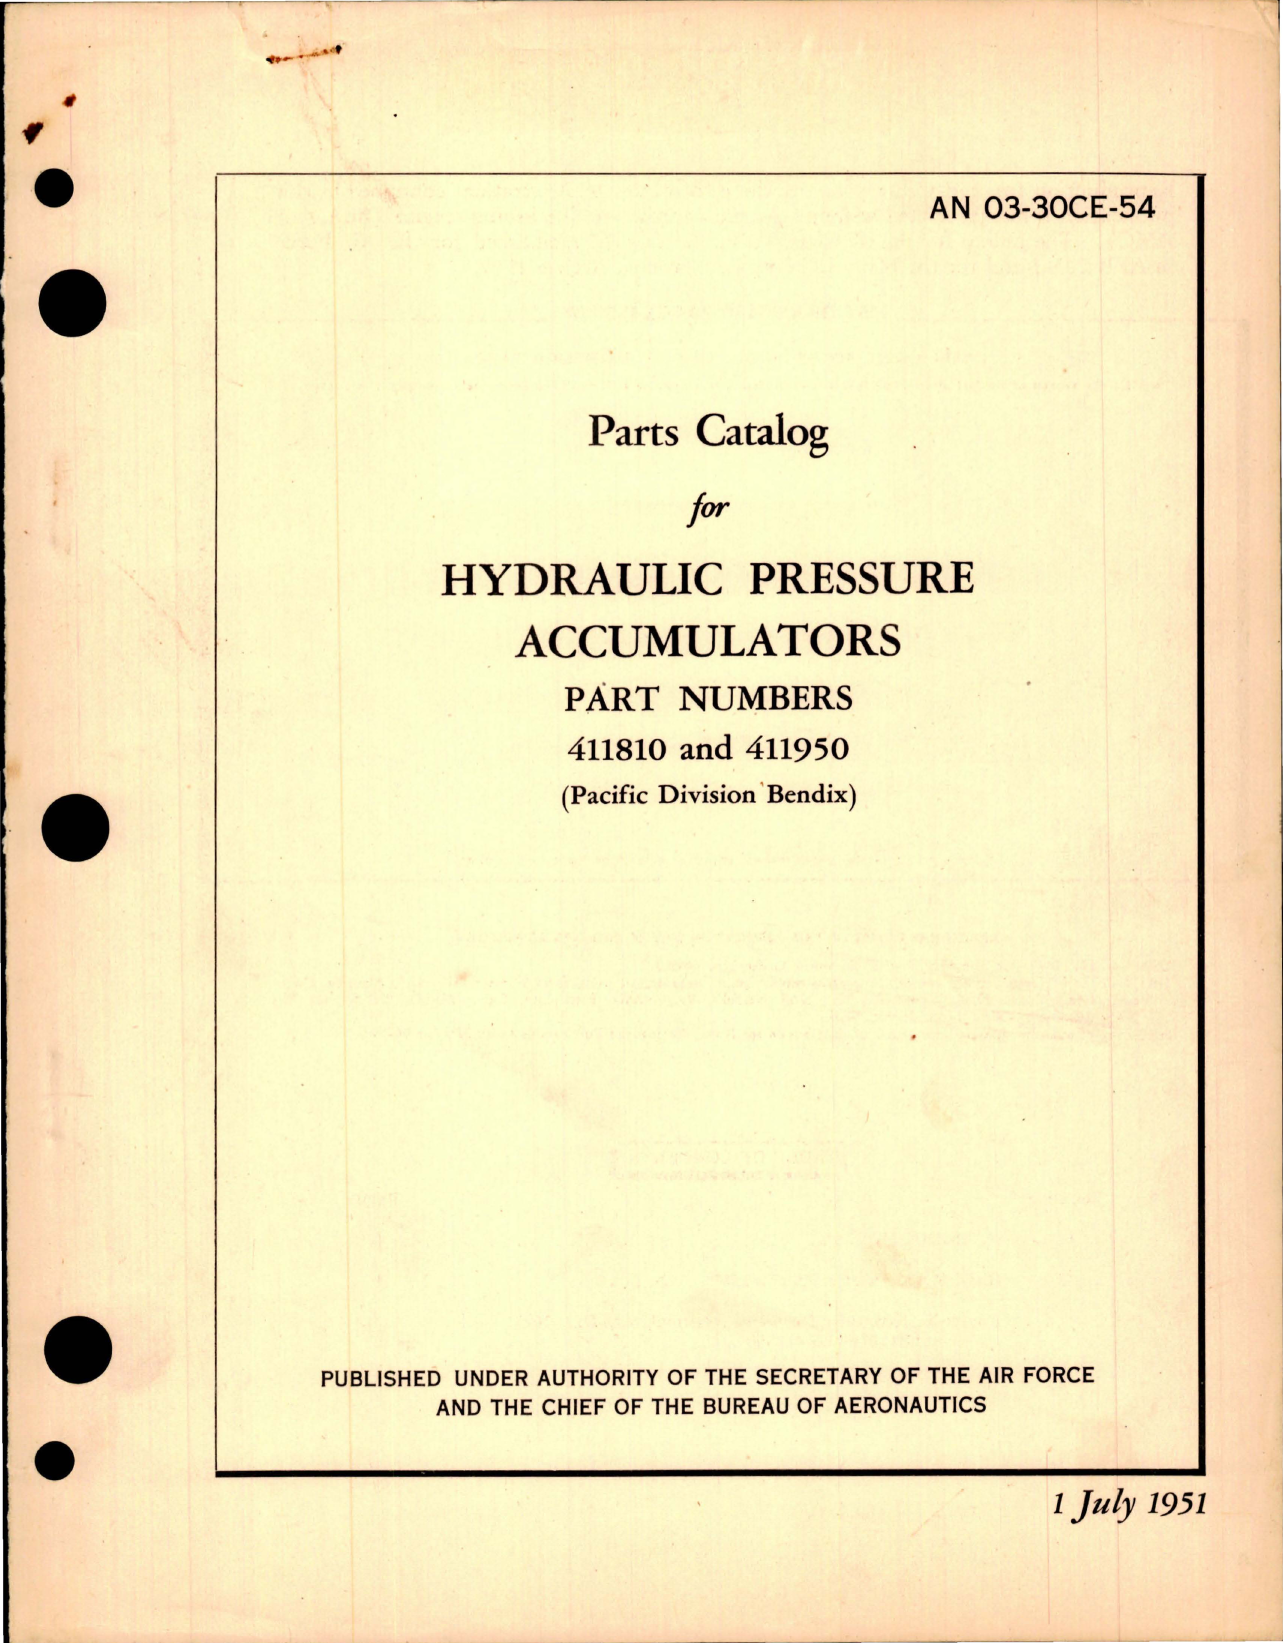 Sample page 1 from AirCorps Library document: Parts Catalog for Hydraulic Pressure Accumulators - Parts 411810 and 411950 